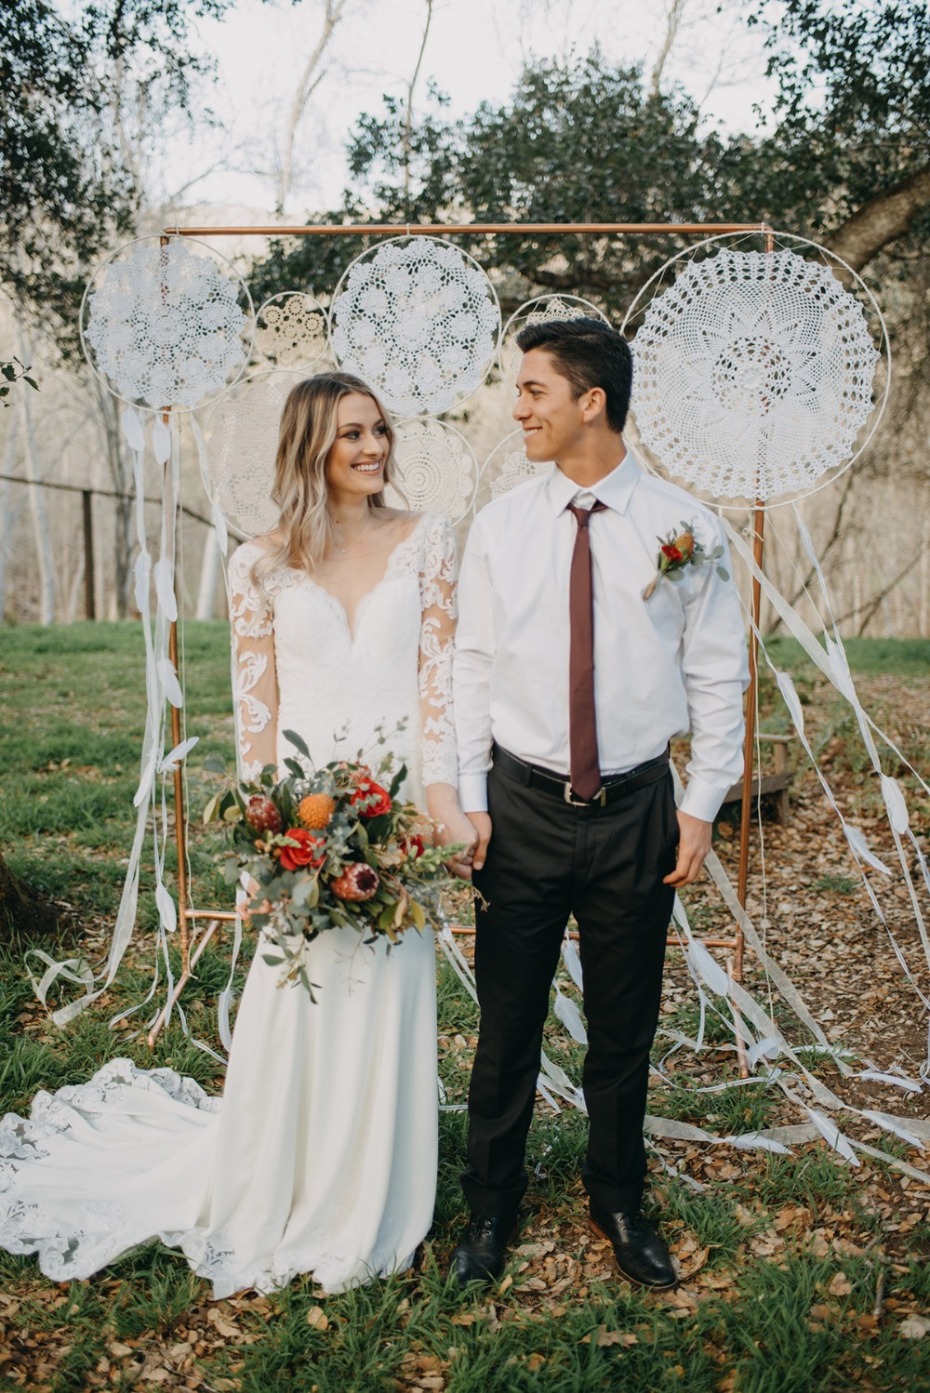 How A Few Hard Working Elements Can Make Your Boho Wedding